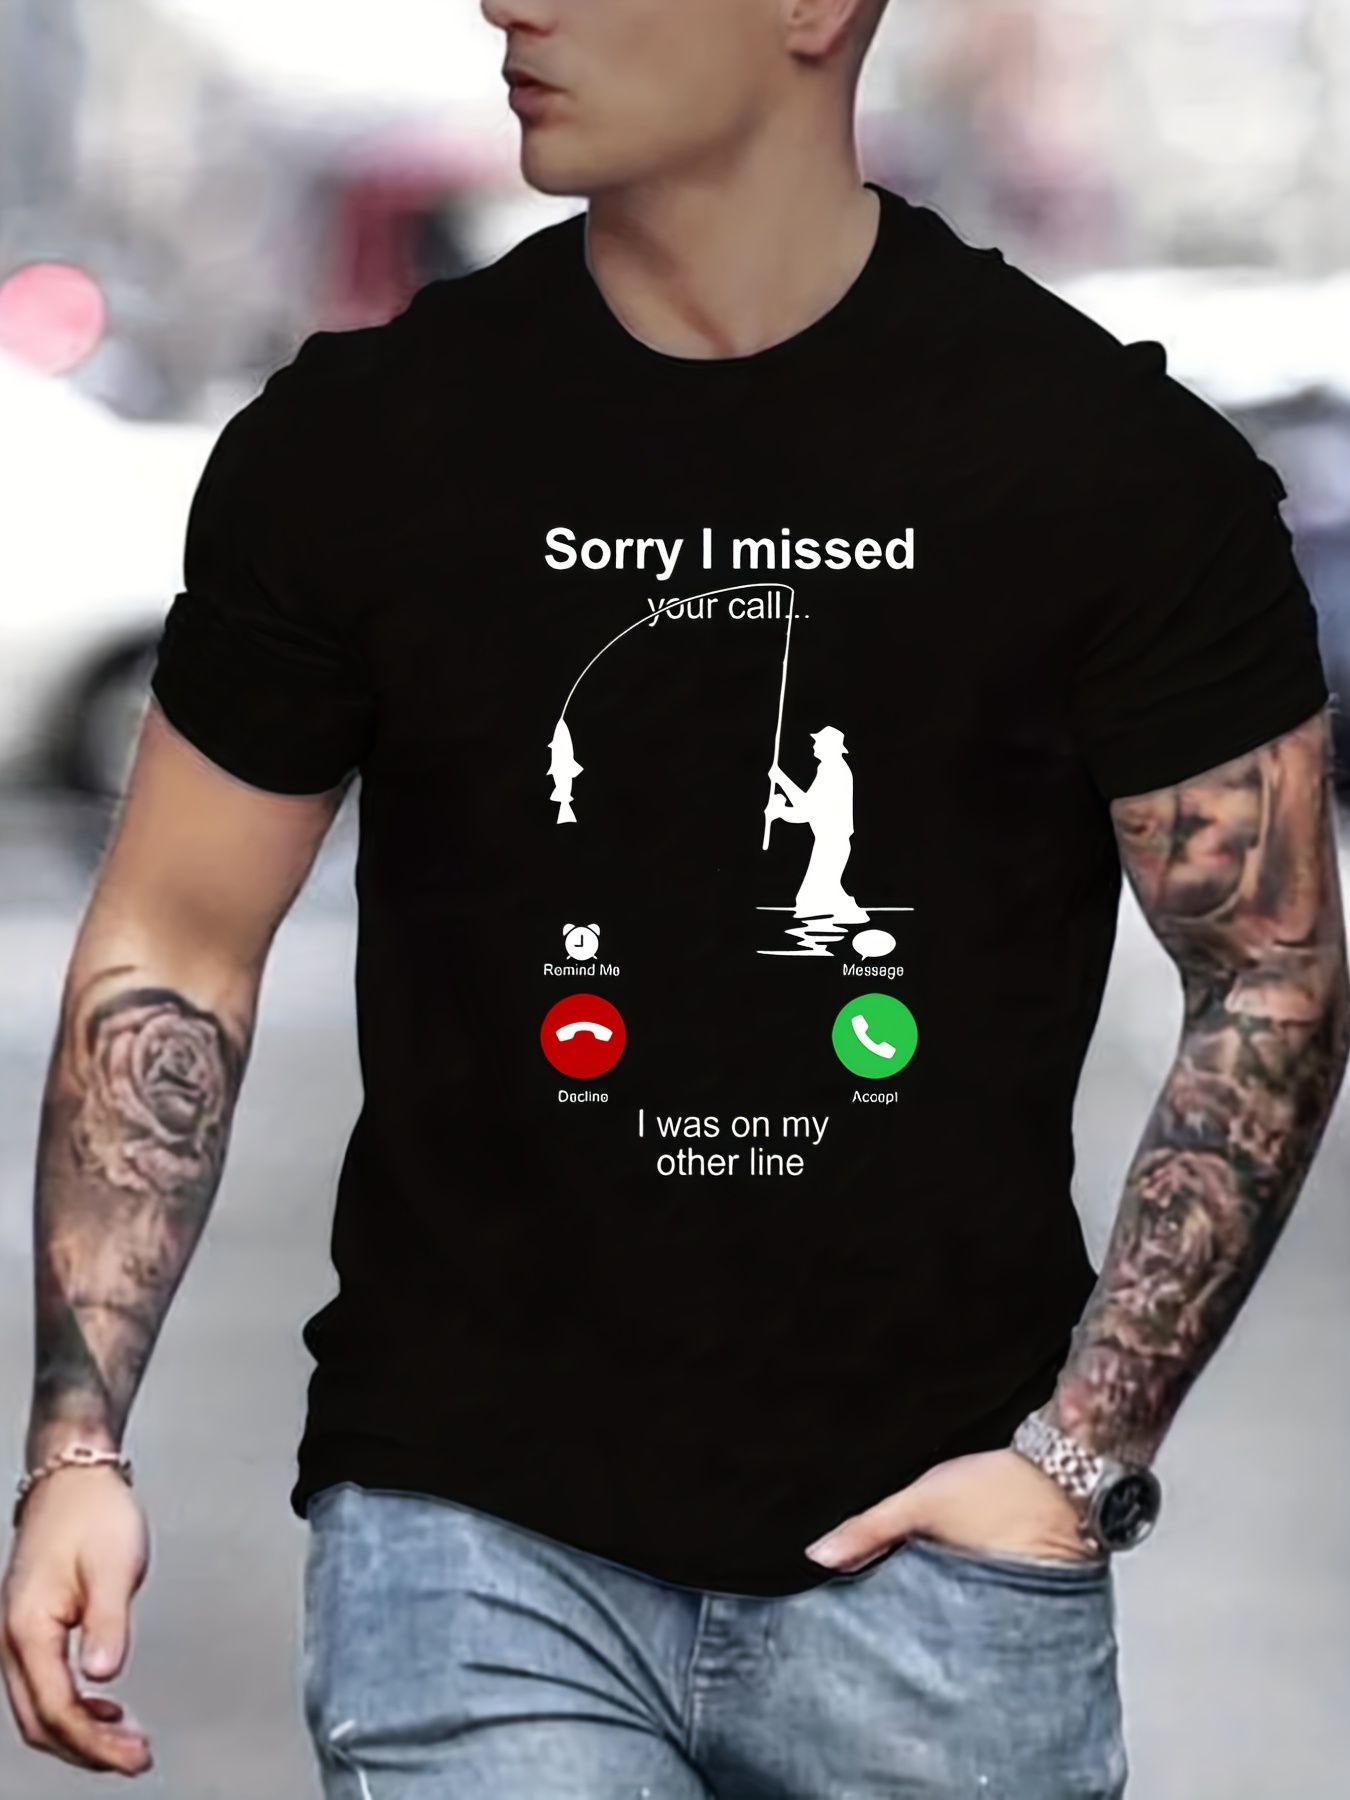 Funny Fishing Man Missed Call Pattern Print Men's T-shirt, Graphic Tee  Men's Summer Clothes, Men's Outfits